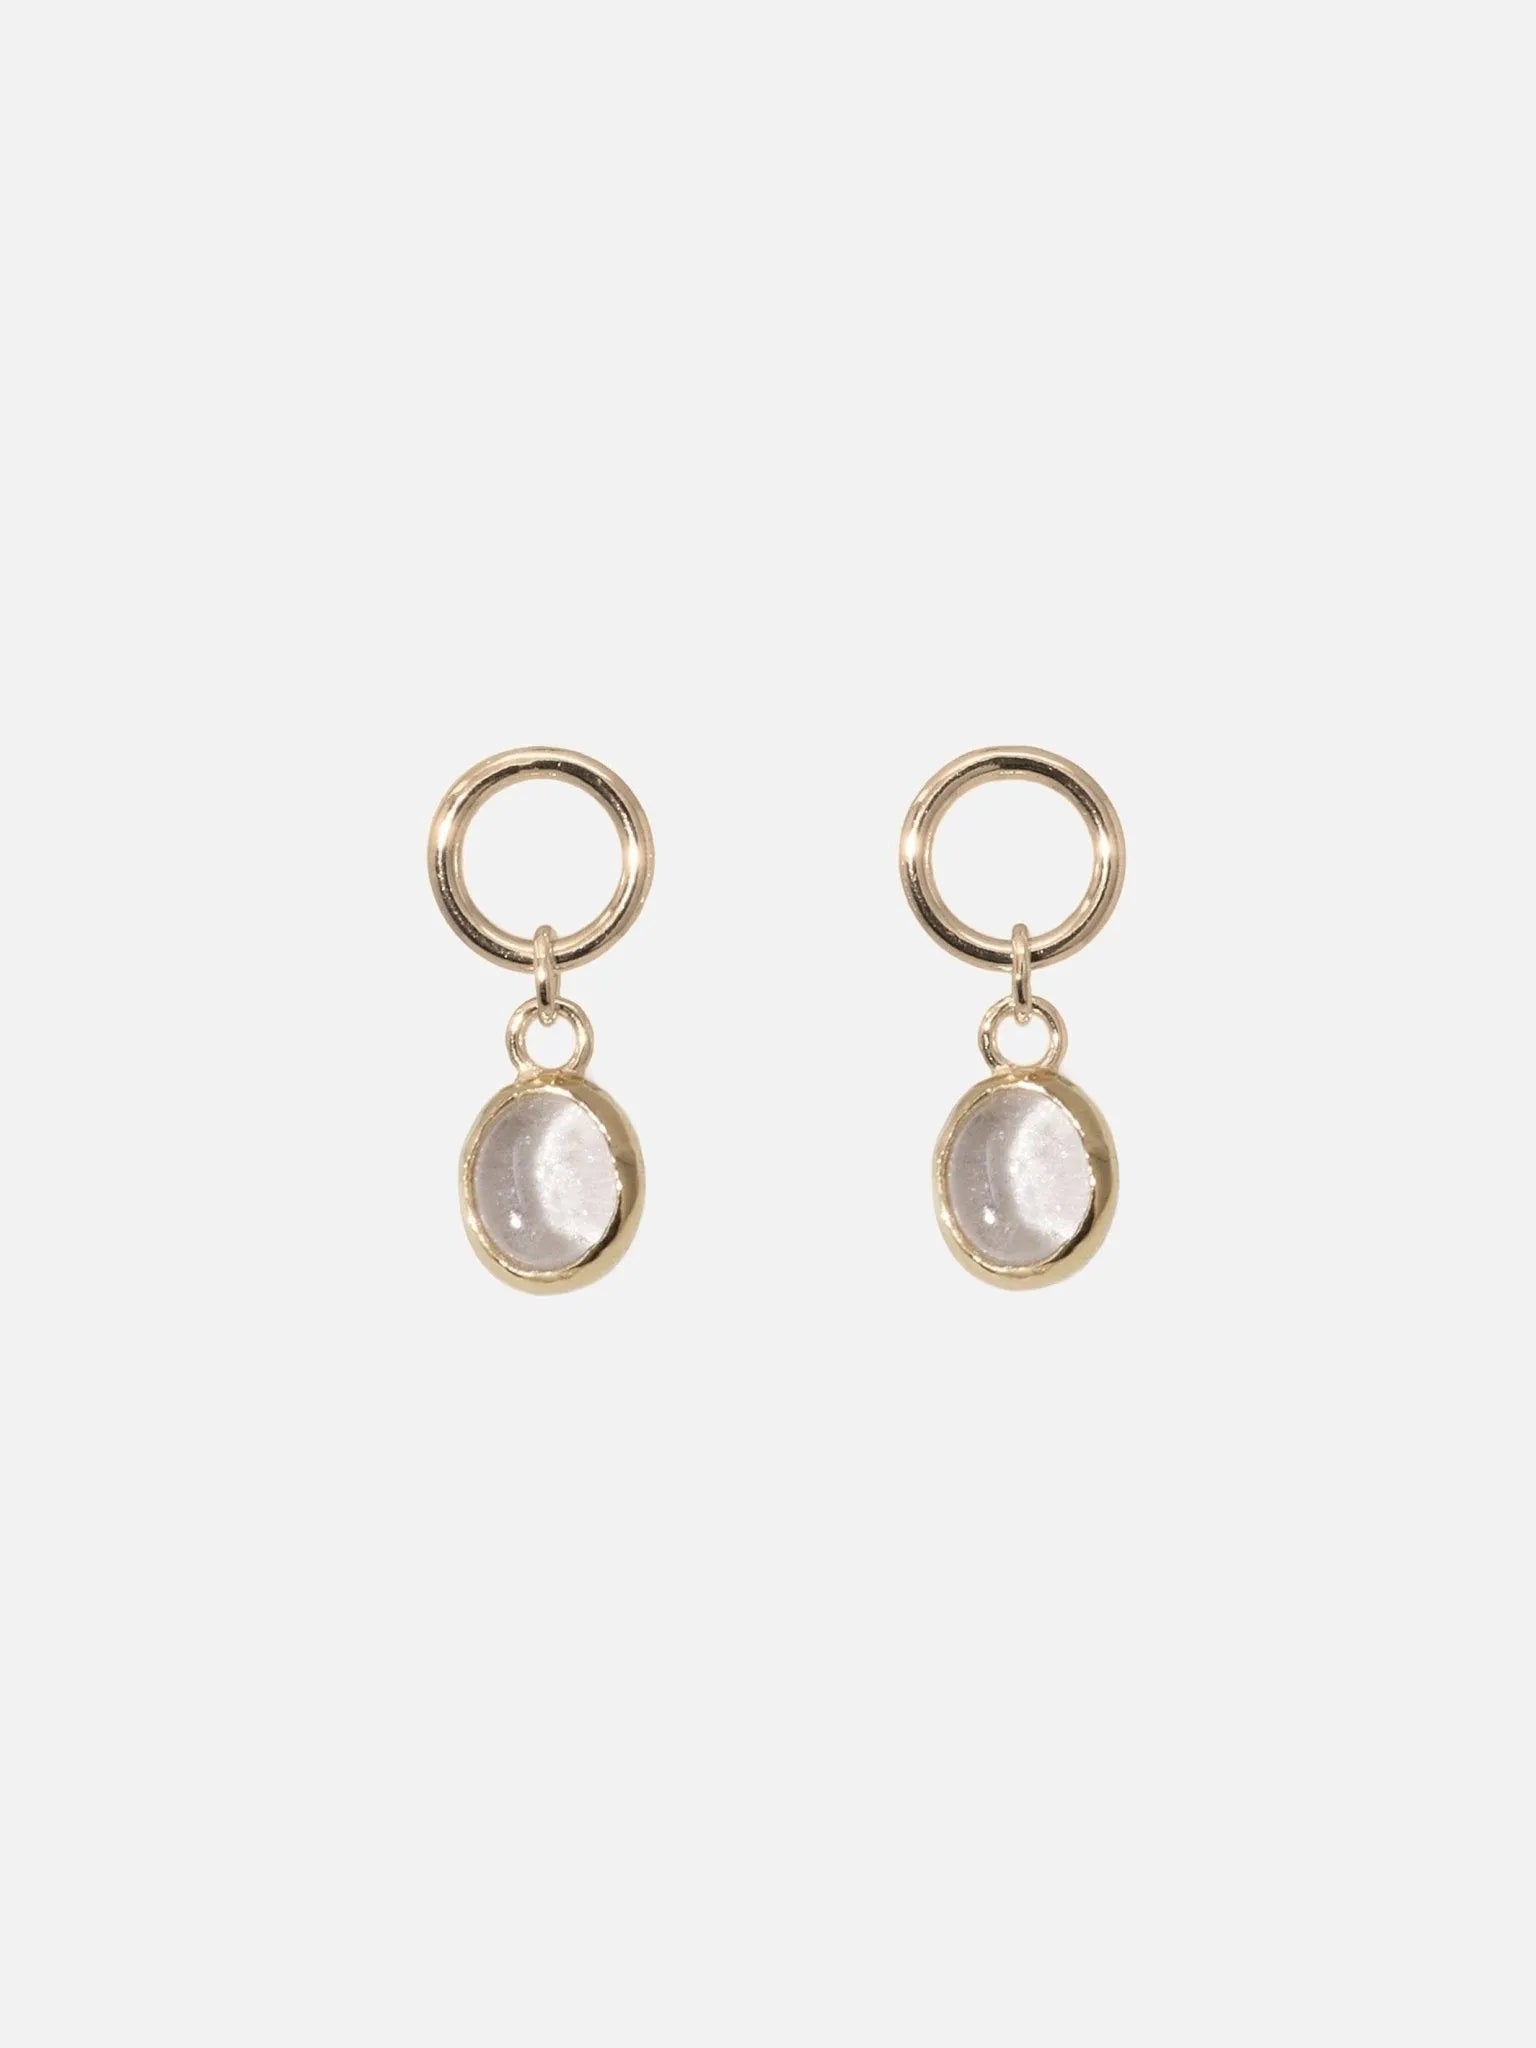 Oval Dangling Earrings - At Present